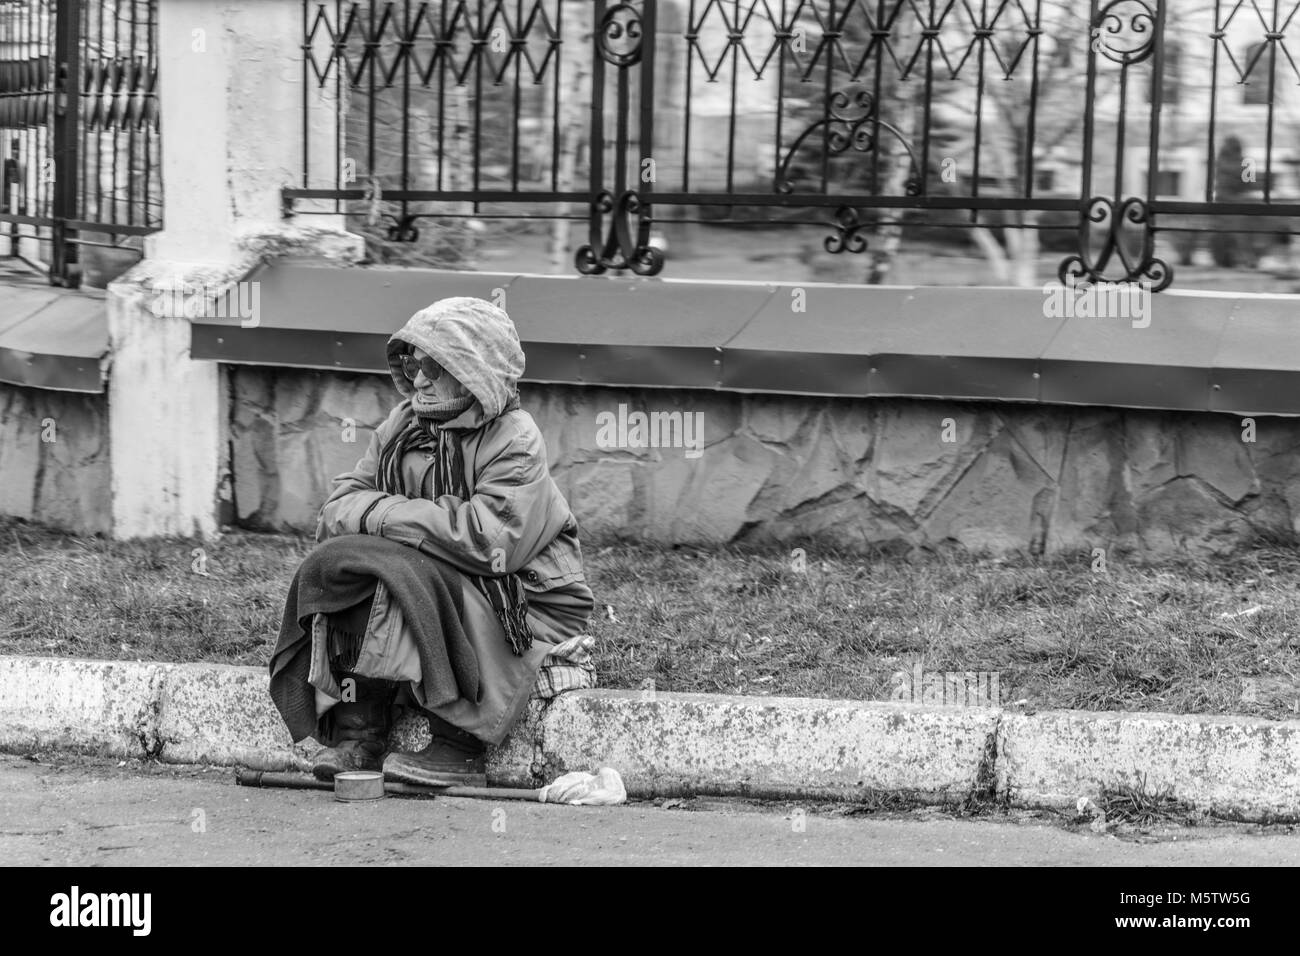 A woman sits on the road near the park and asks for money. Black and white photo. Stock Photo